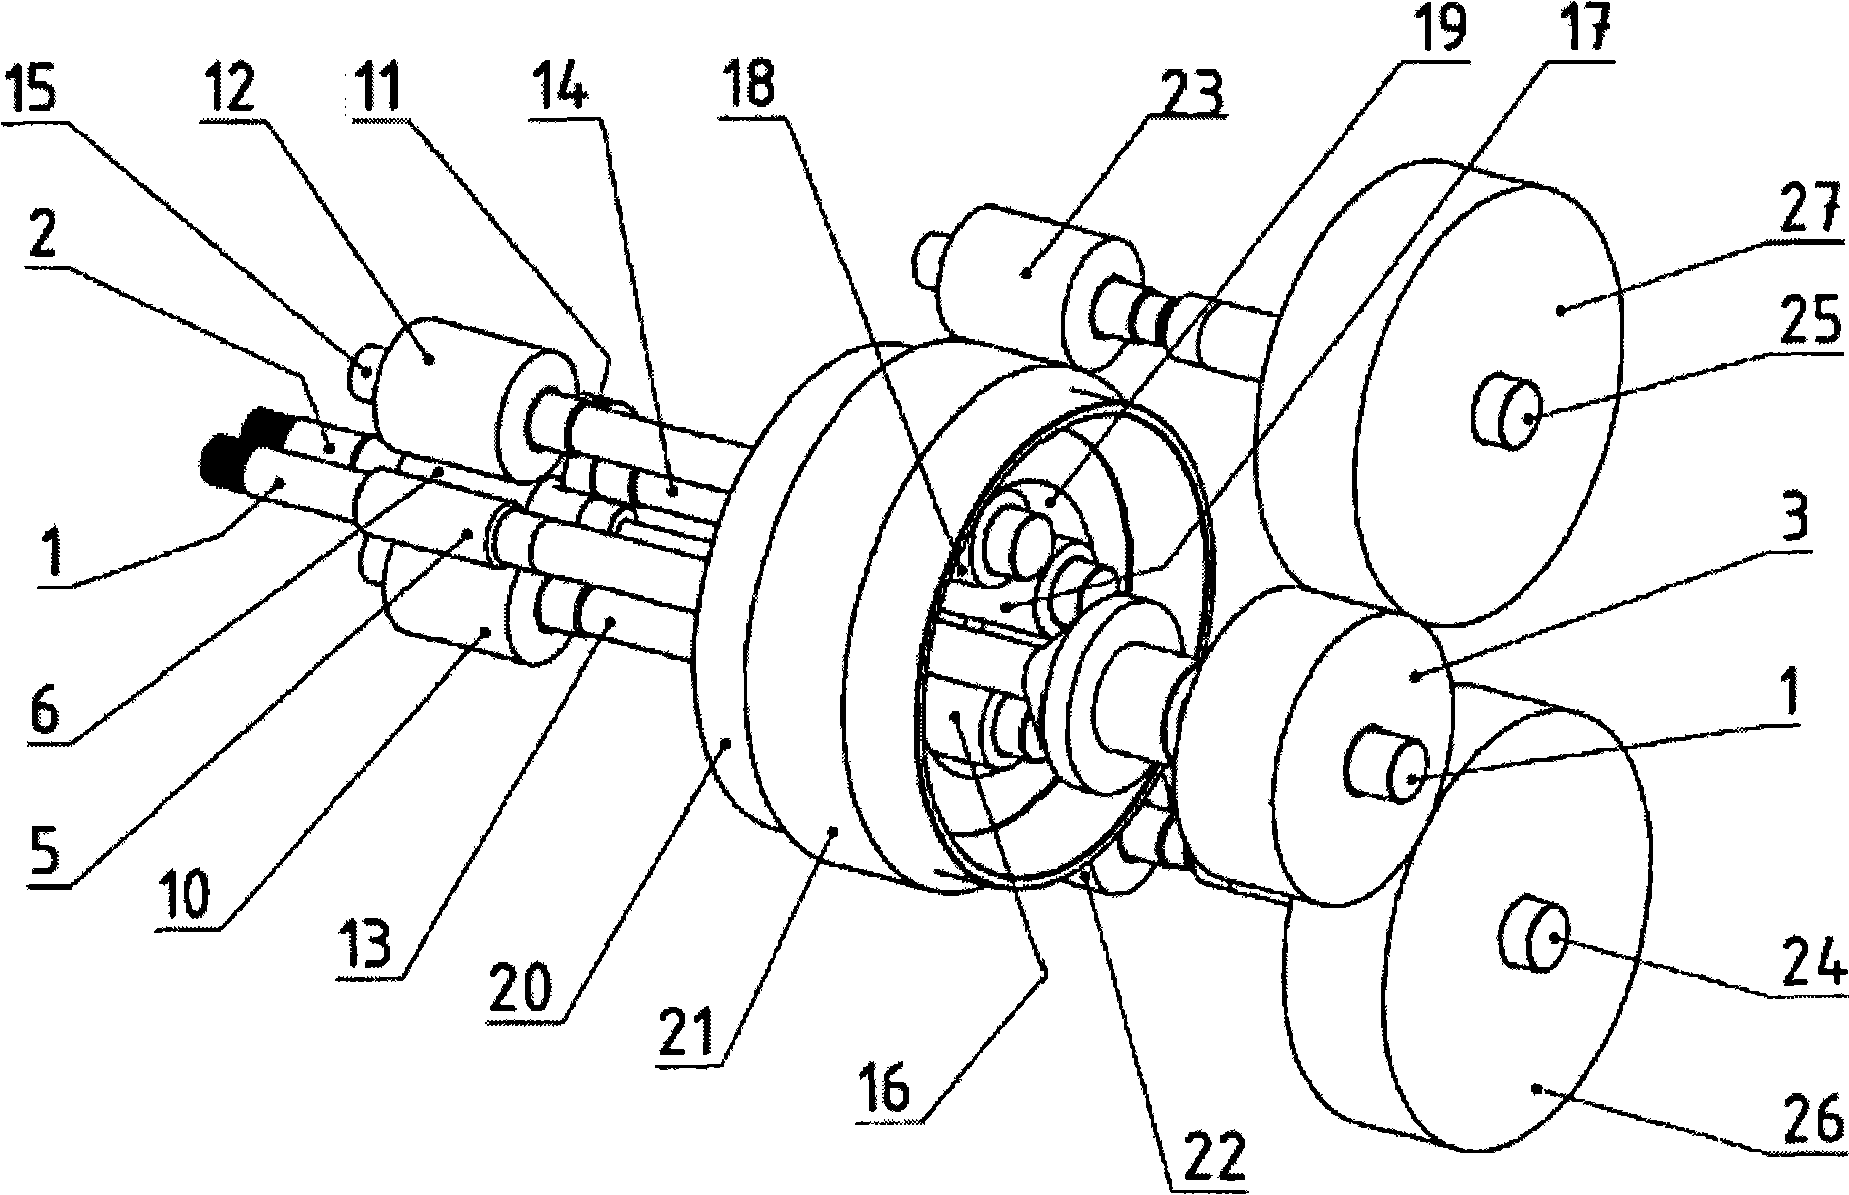 Gear system for a twin-screw extruder